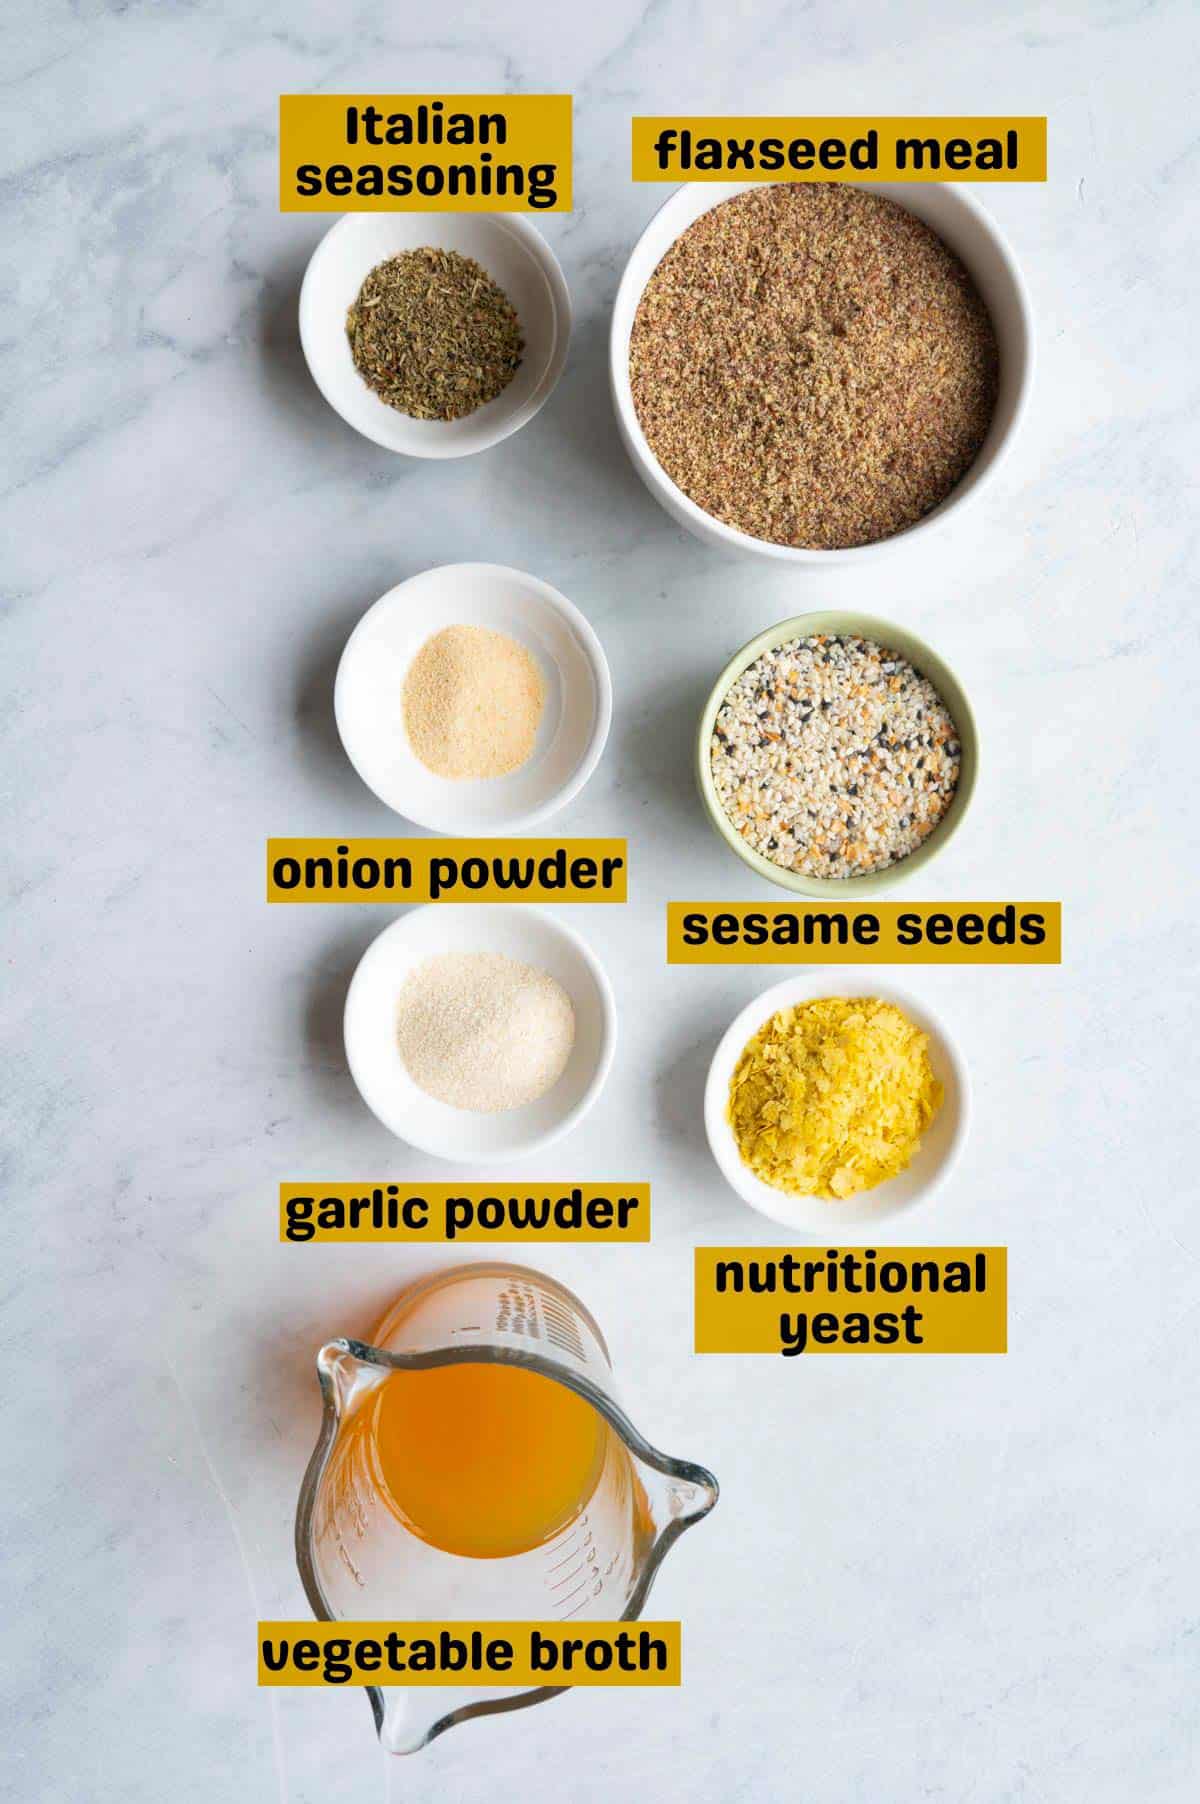 Italian seasoning, flaxseed meal, onion powder, sesame seeds, garlic powder, nutritional yeast, and vegetable broth in containers on a white backdrop.